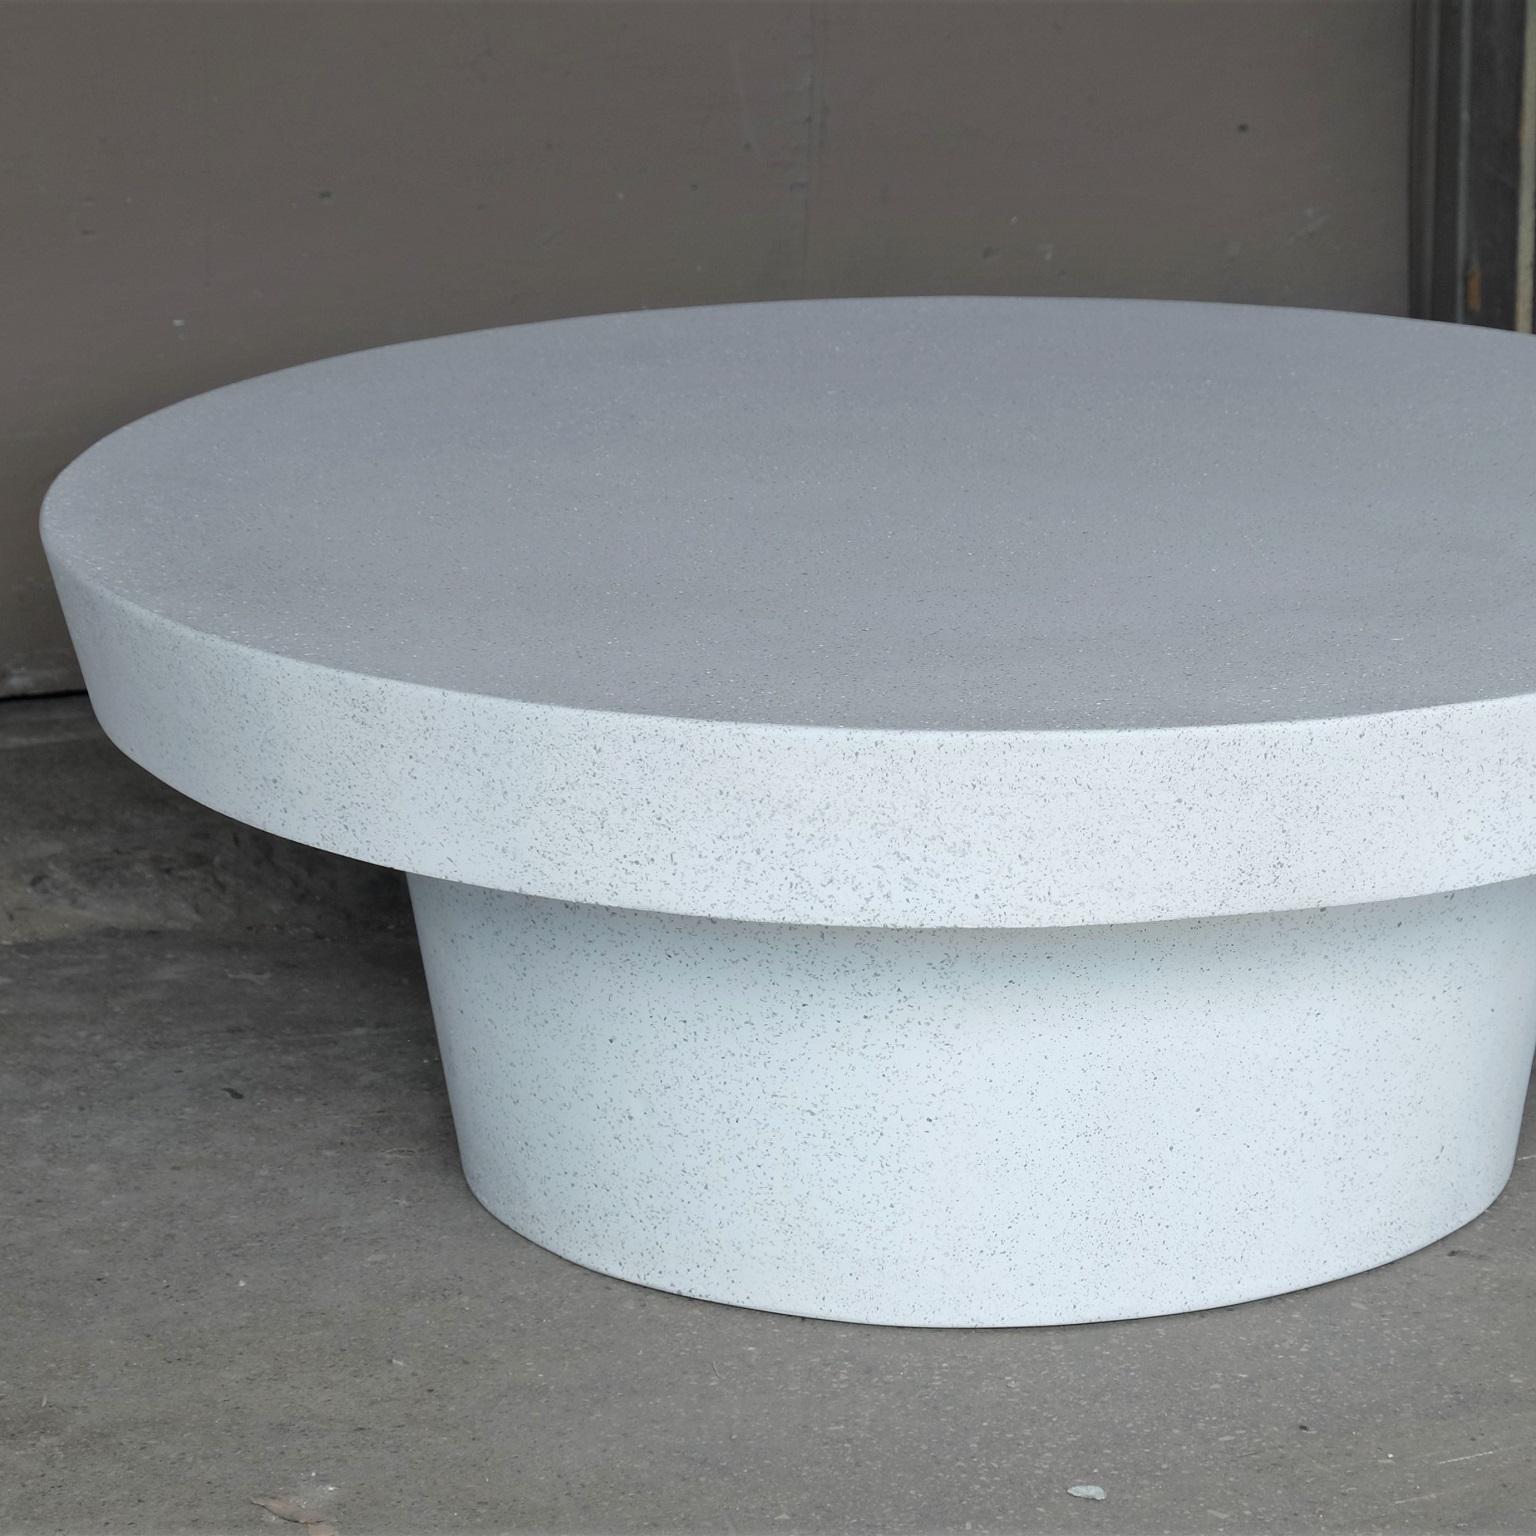 Minimalist Cast Resin 'Cashi' Low Table, White Stone Finish by Zachary A. Design For Sale